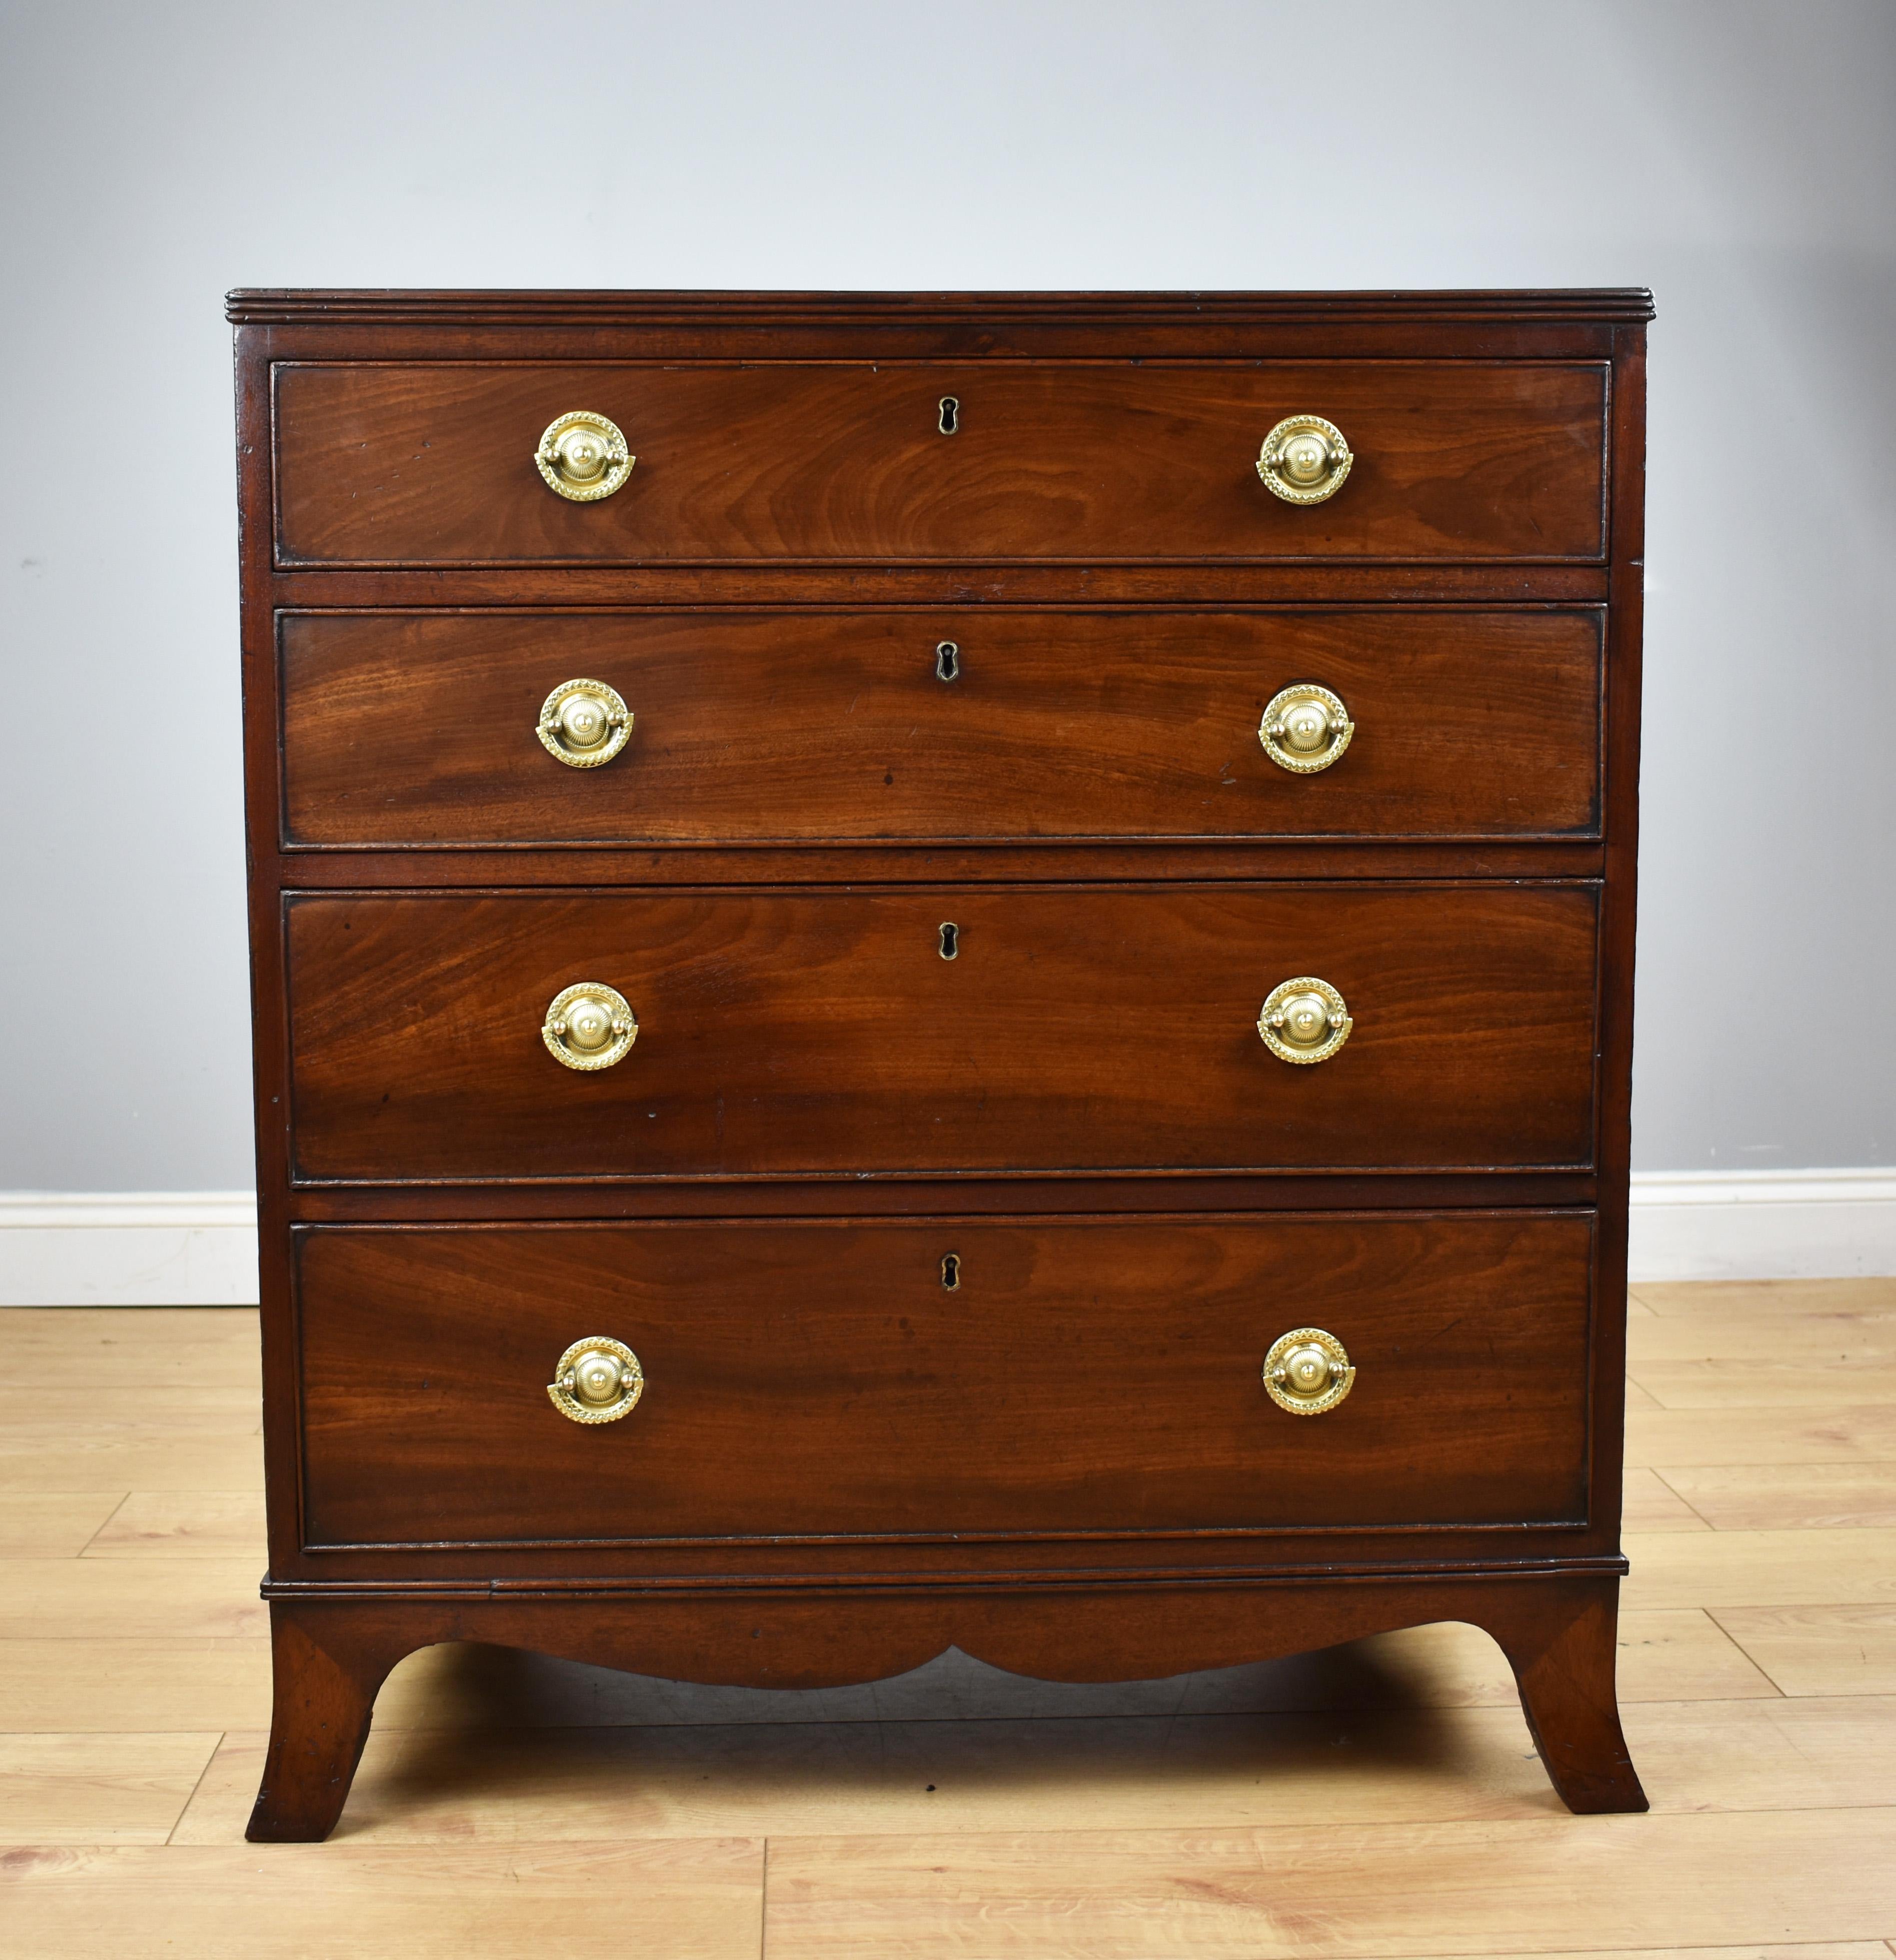 For sale is a good quality Regency mahogany chest of drawers, having four graduated drawers, each with brass handles. The chest is raised on nicely splayed feet and is in very good condition for its age. 

Measures: Width 32